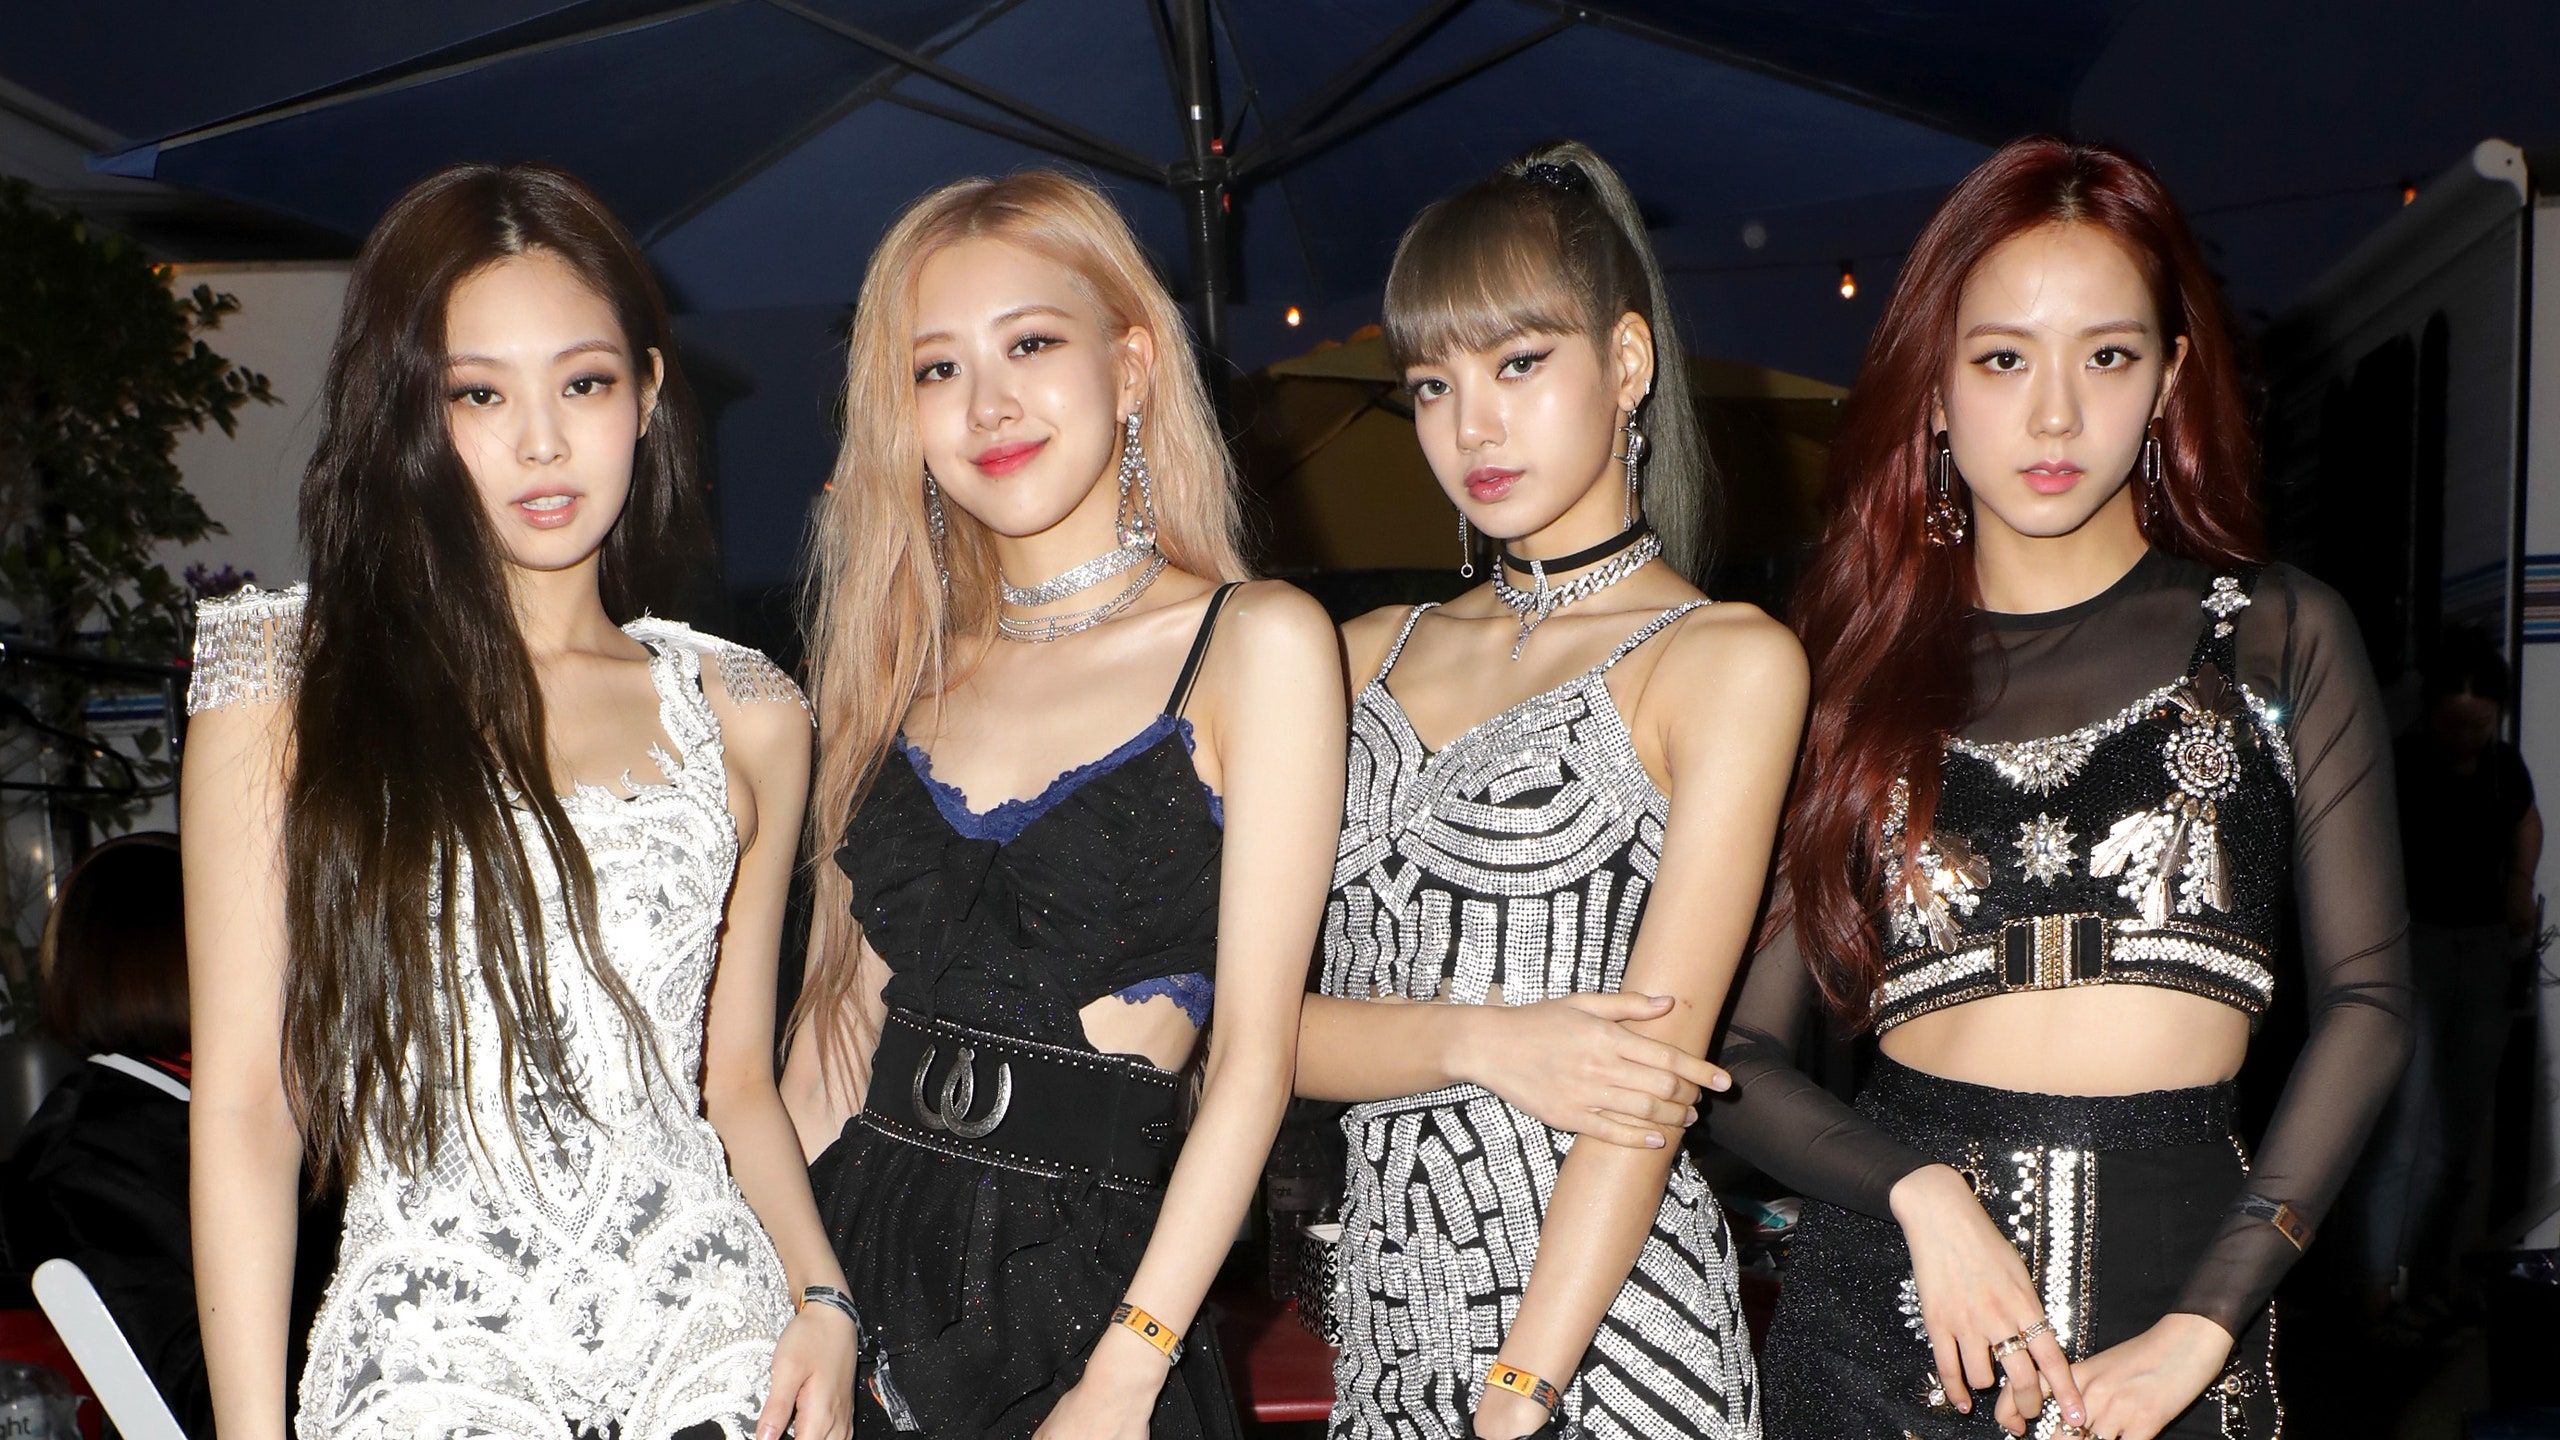 BLACKPINK's “Lovesick Girls” Video Will Be Edited by YG After Backlash